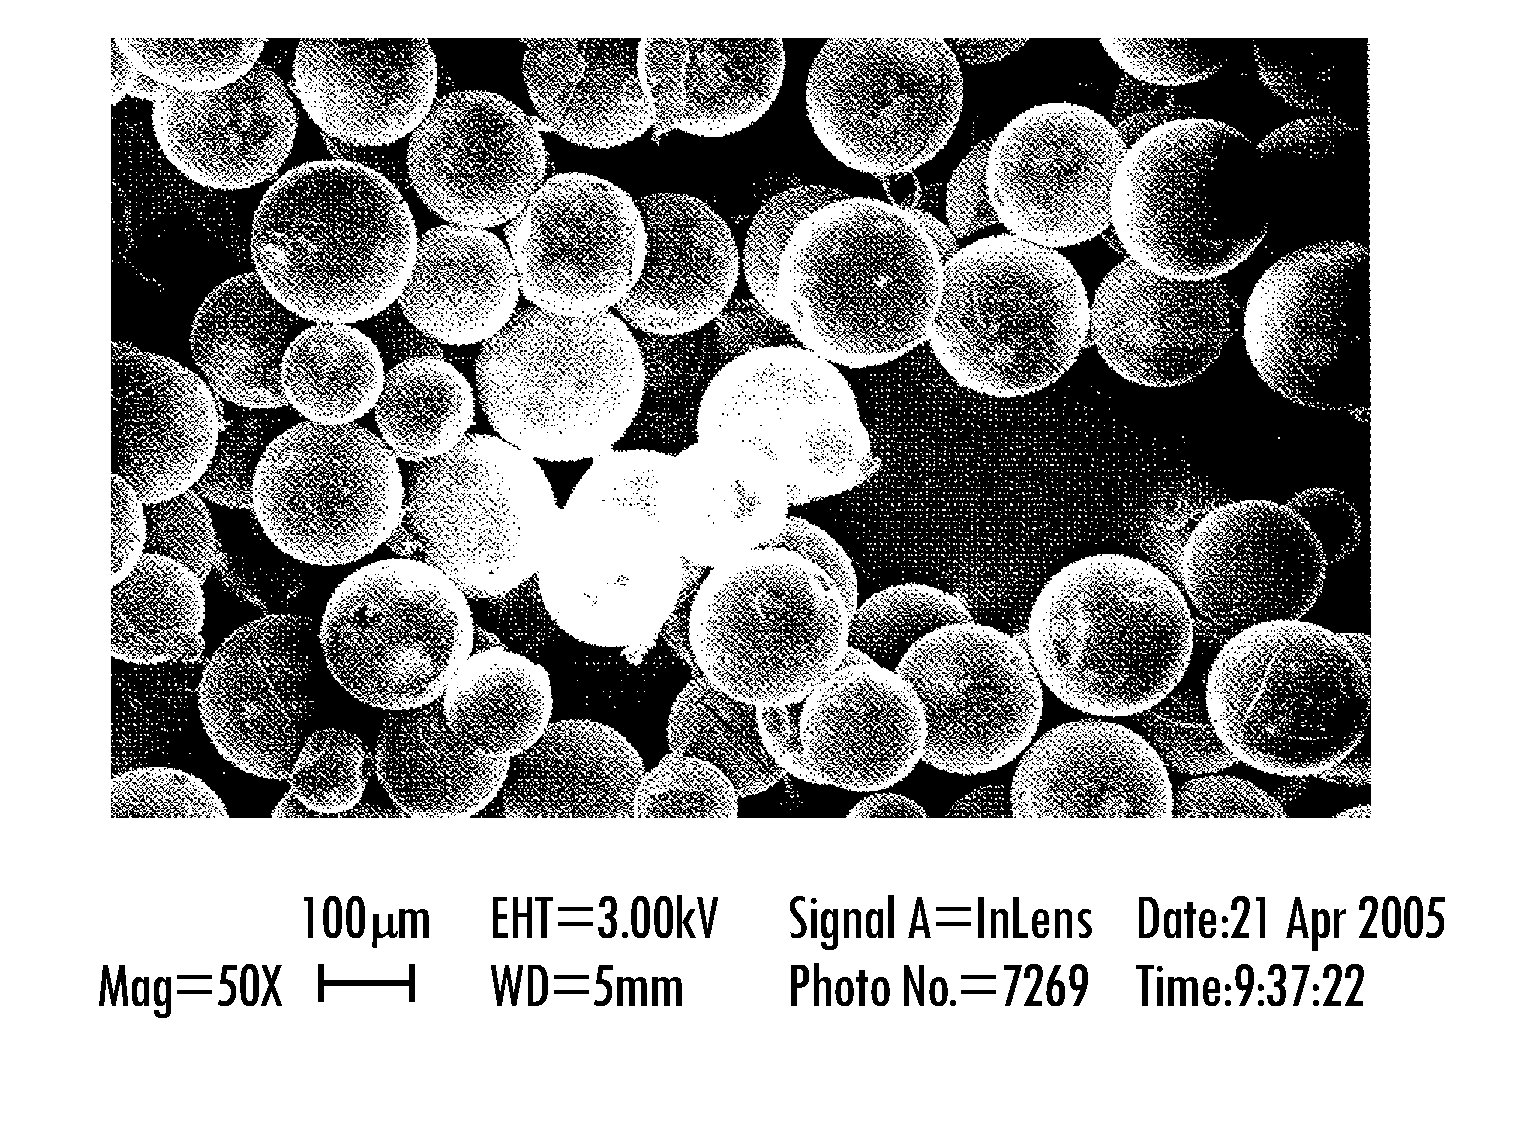 Loadable Polymeric Particles For Enhanced Imaging In Clinical Applications And Methods Of Preparing And Using The Same